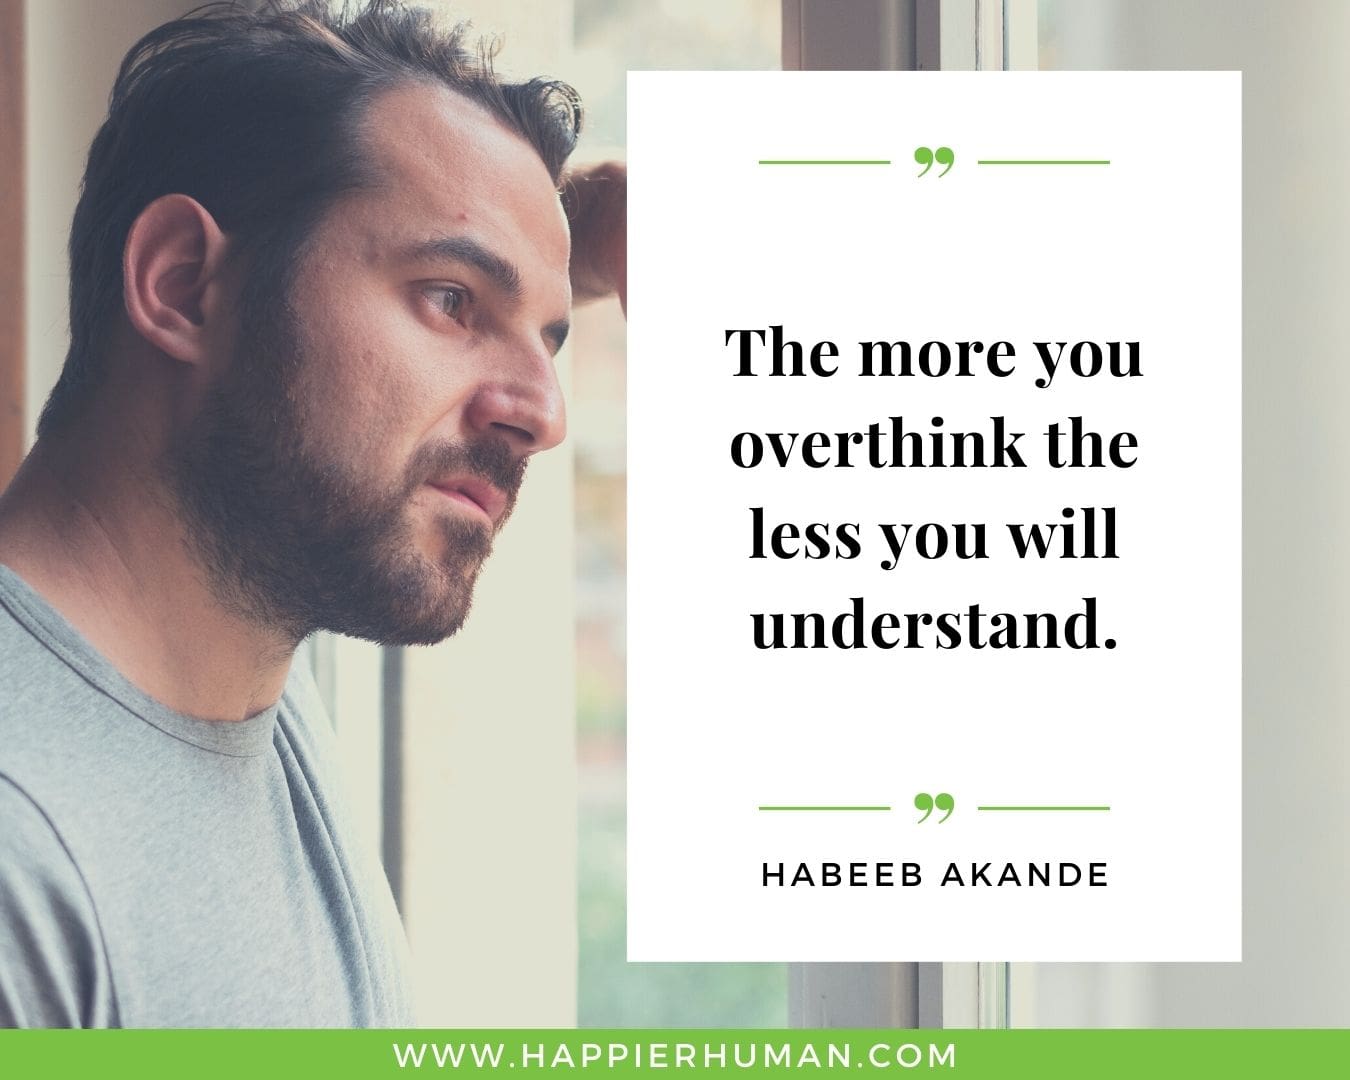 Overthinking Quotes - “The more you overthink the less you will understand.” - Habeeb Akande